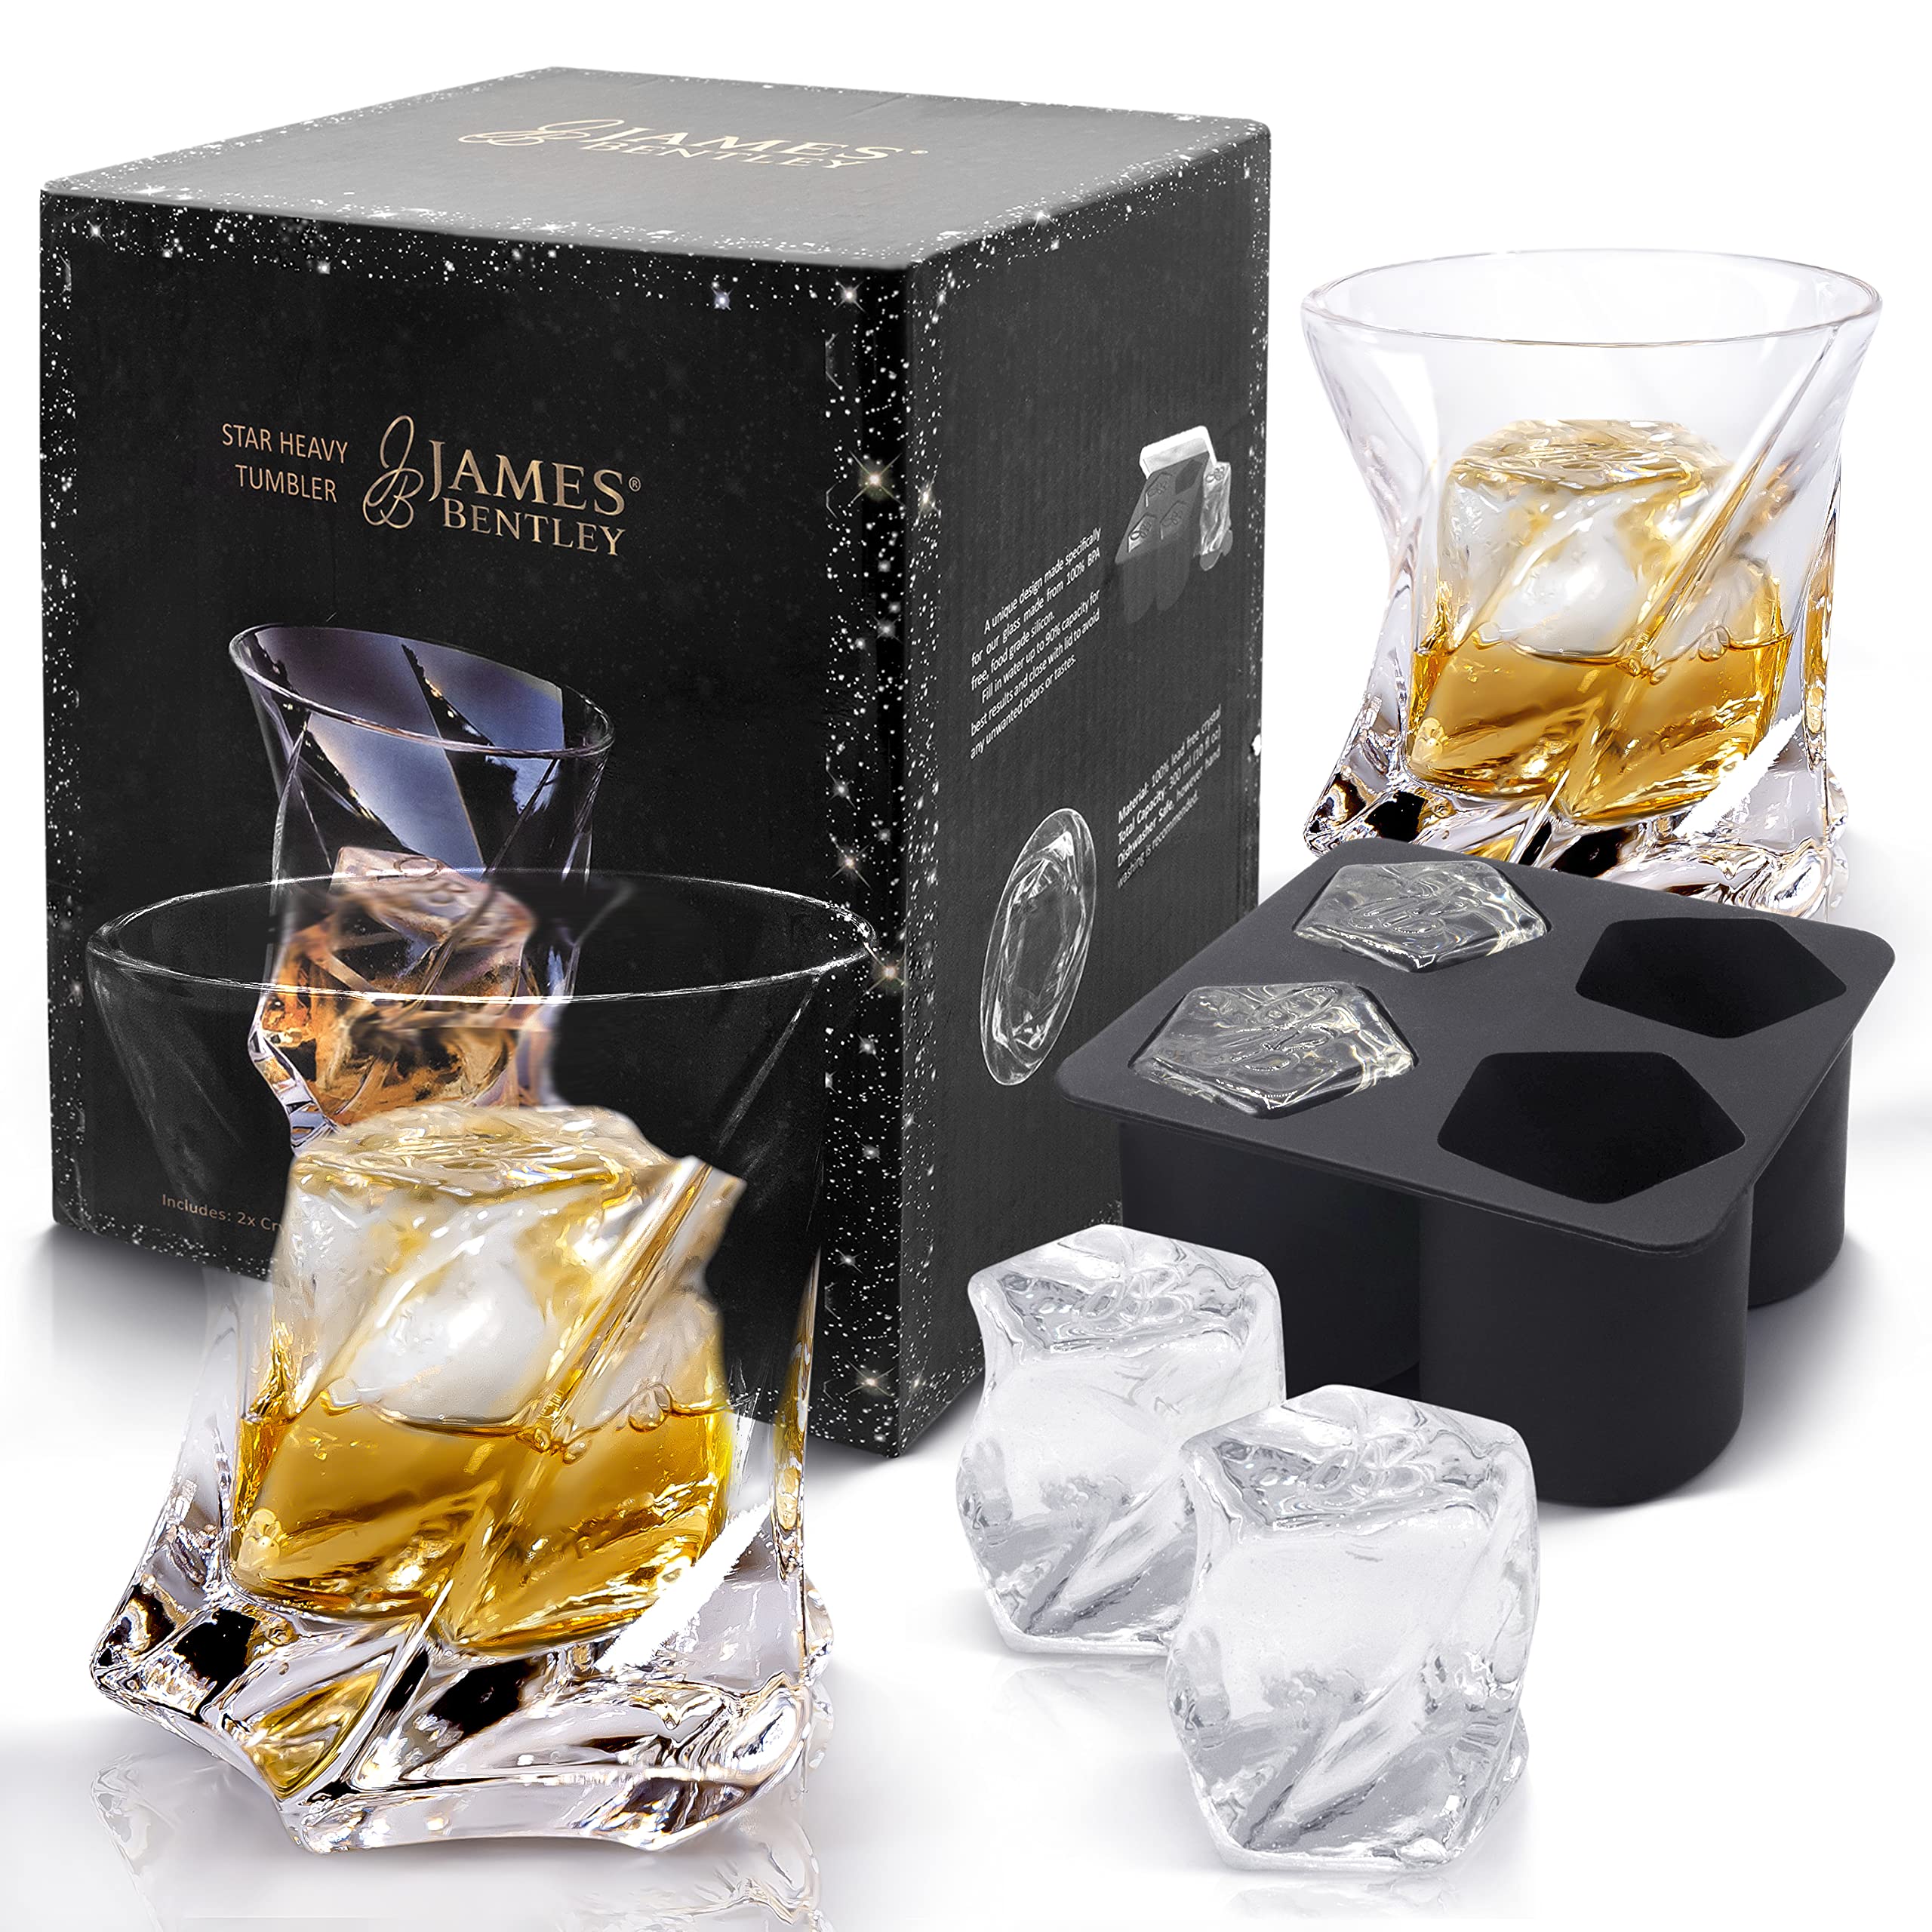 STAR Whiskey Glasses Heavy Tumbler – Elevate your Drinking Experience Whiskey Set of 2 Hand Blown, Cystal, Bourbon Glass (7oz) w/ Matching Ice Mold Glassware sets gifts for Men, Rock Glasses